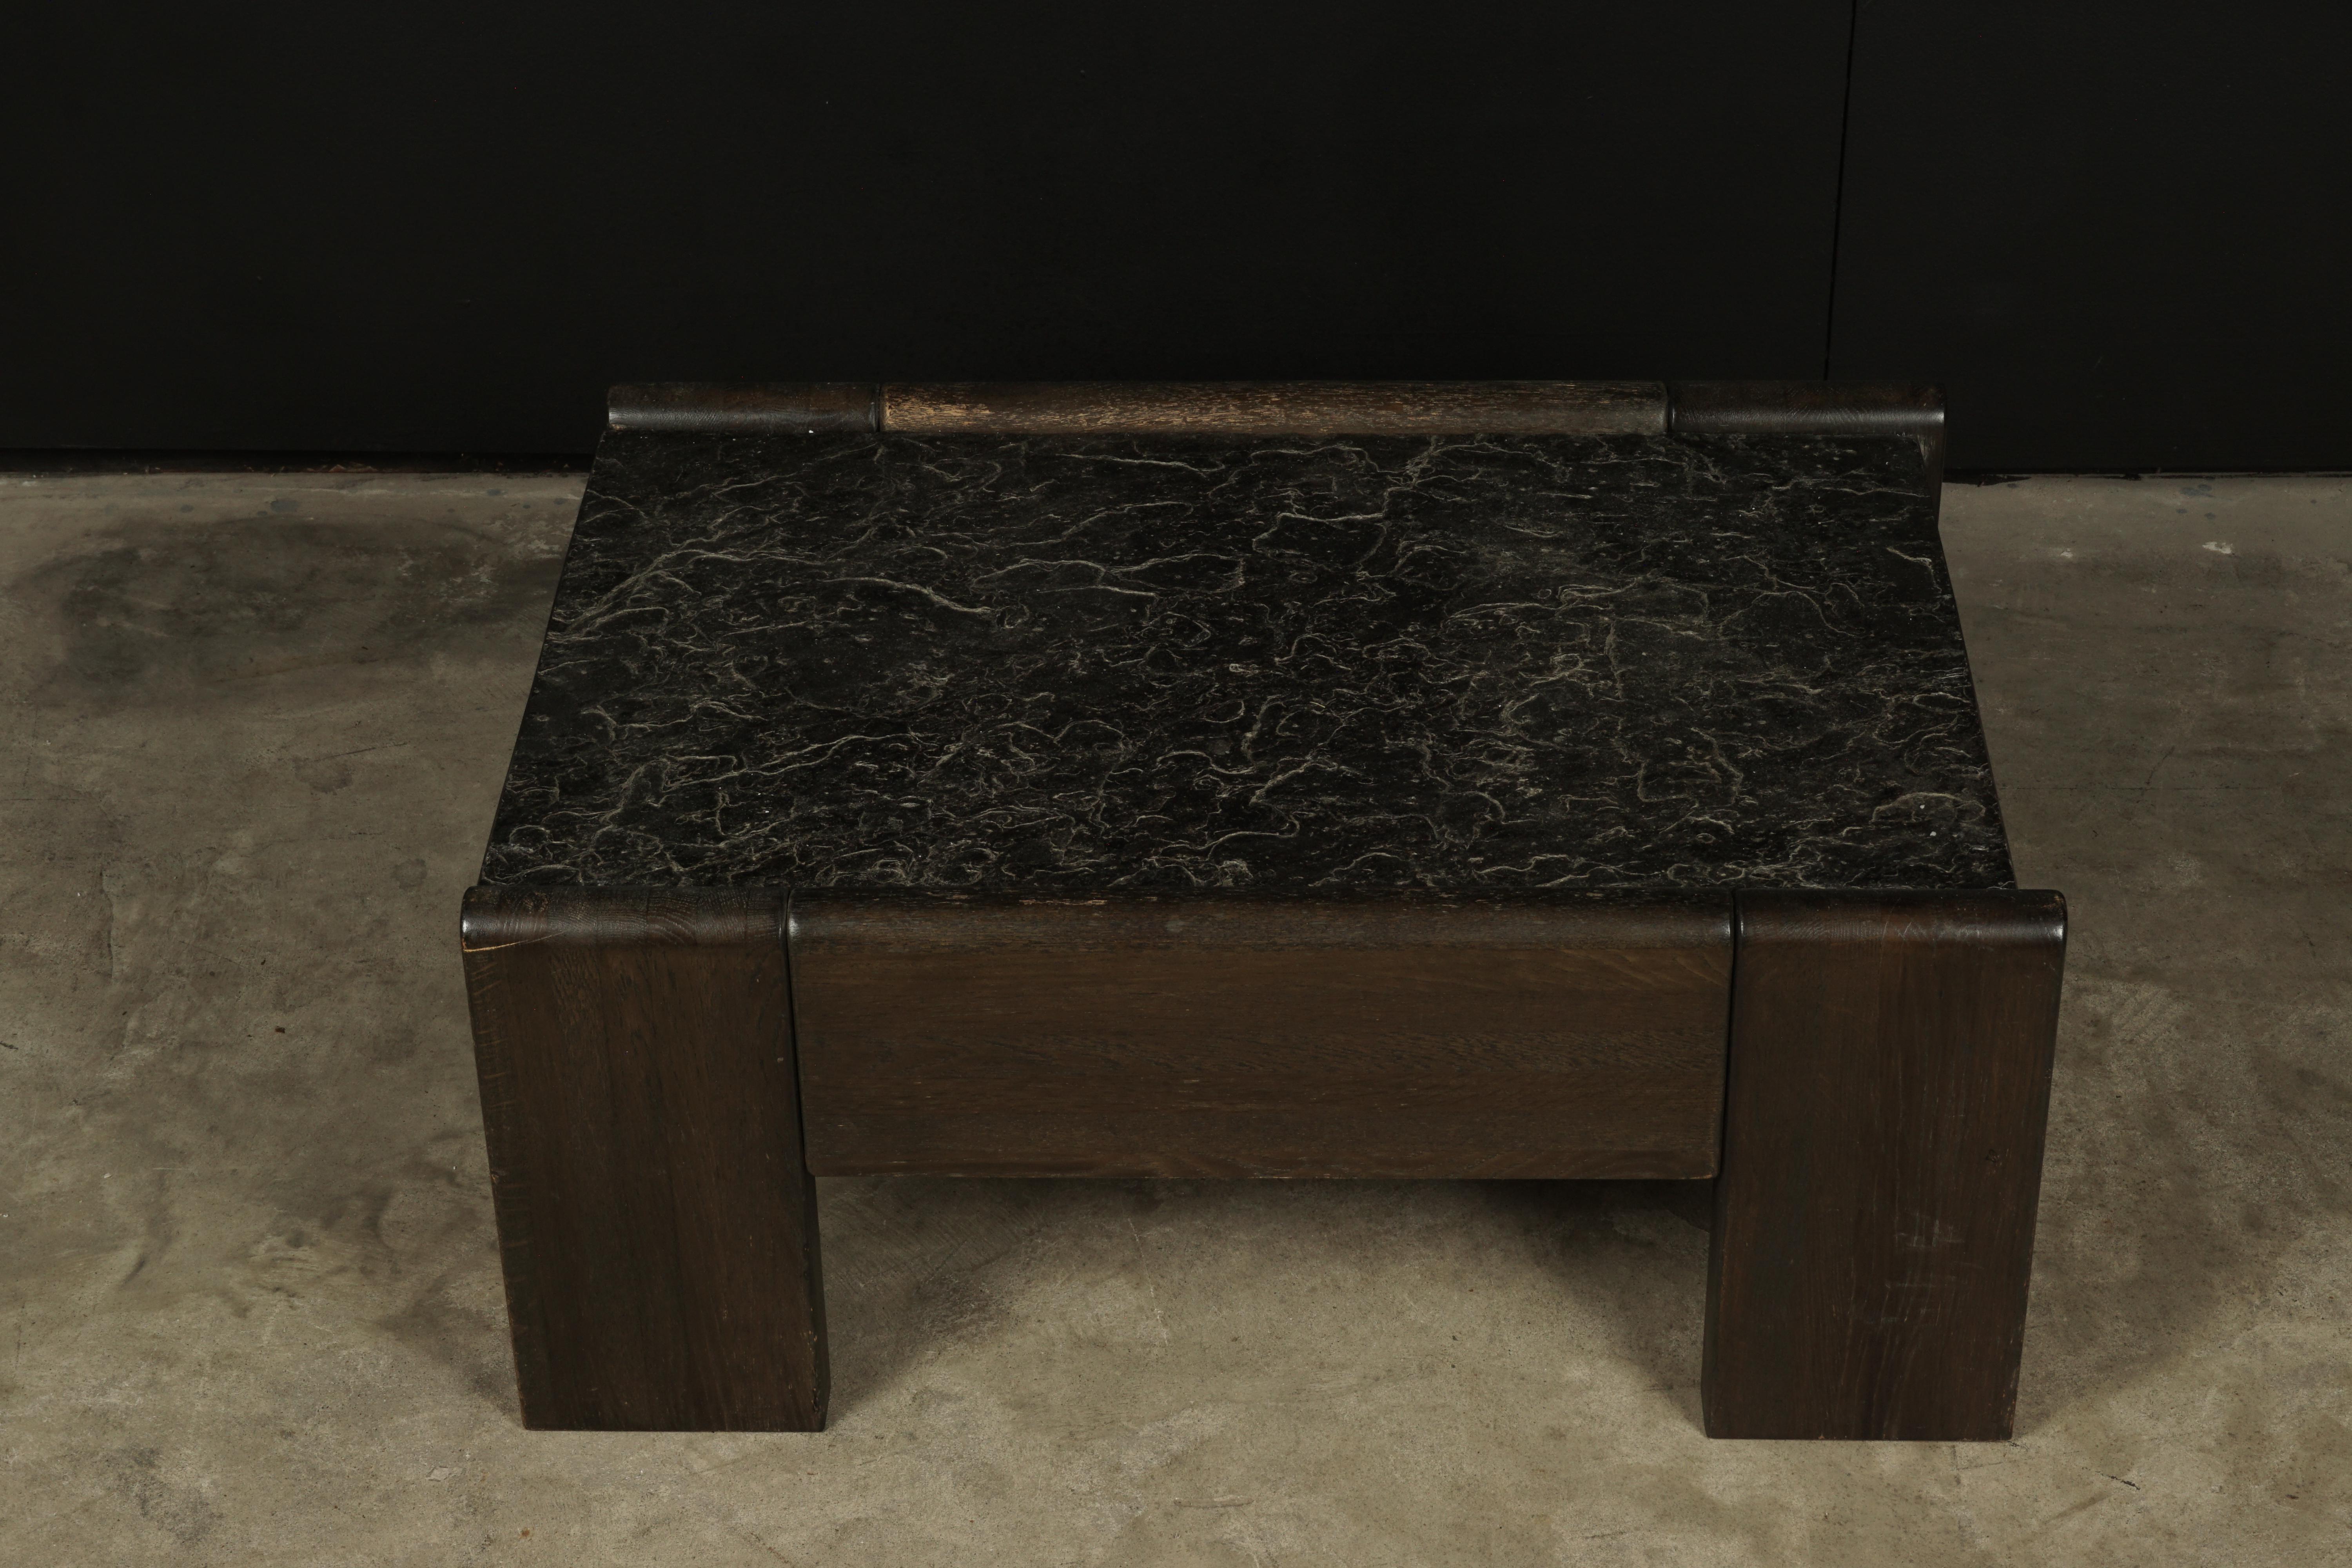 Vintage slate coffee table from the Netherlands, 1960s. Solid slate stone top on a pine base. Very light wear and patina.